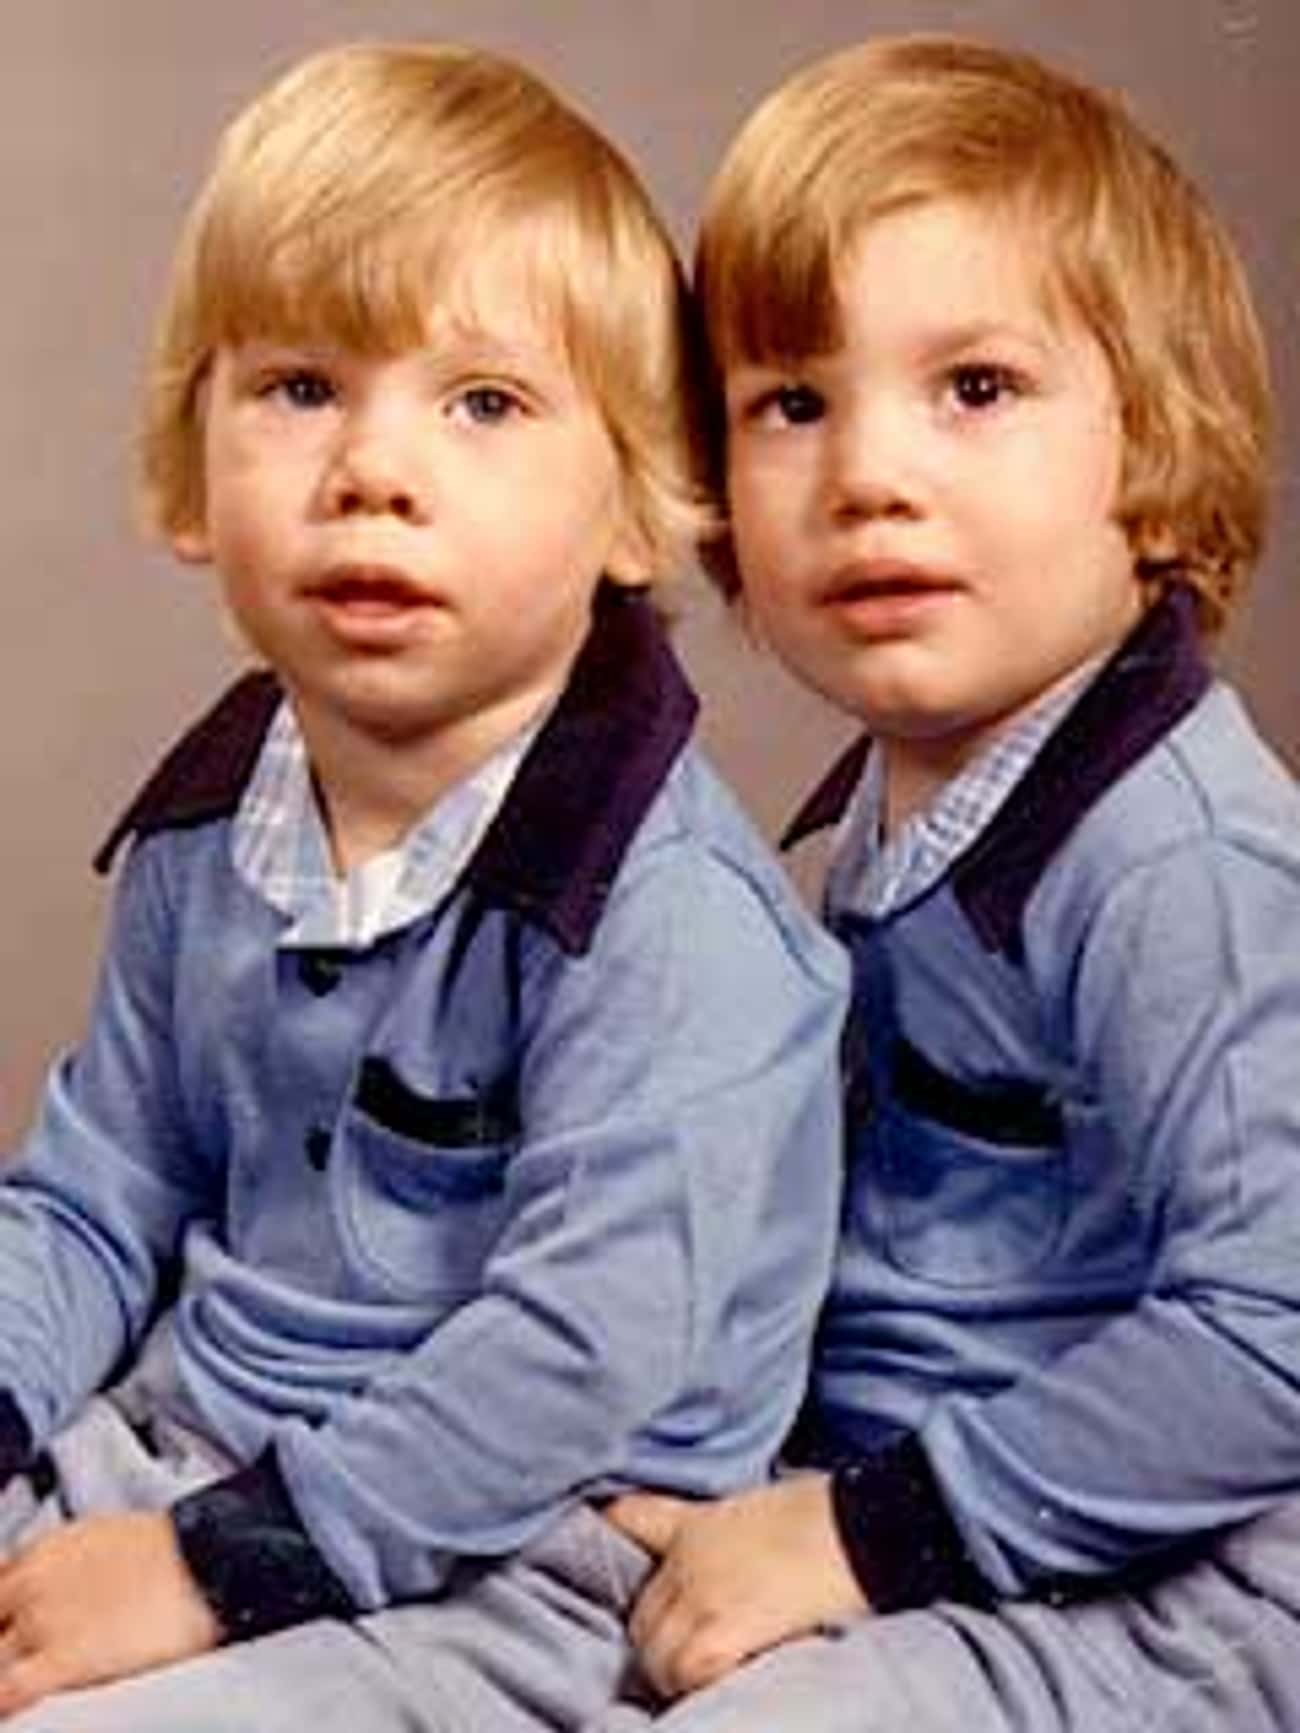 Young Ashton Kutcher as a Baby with Twin Brother